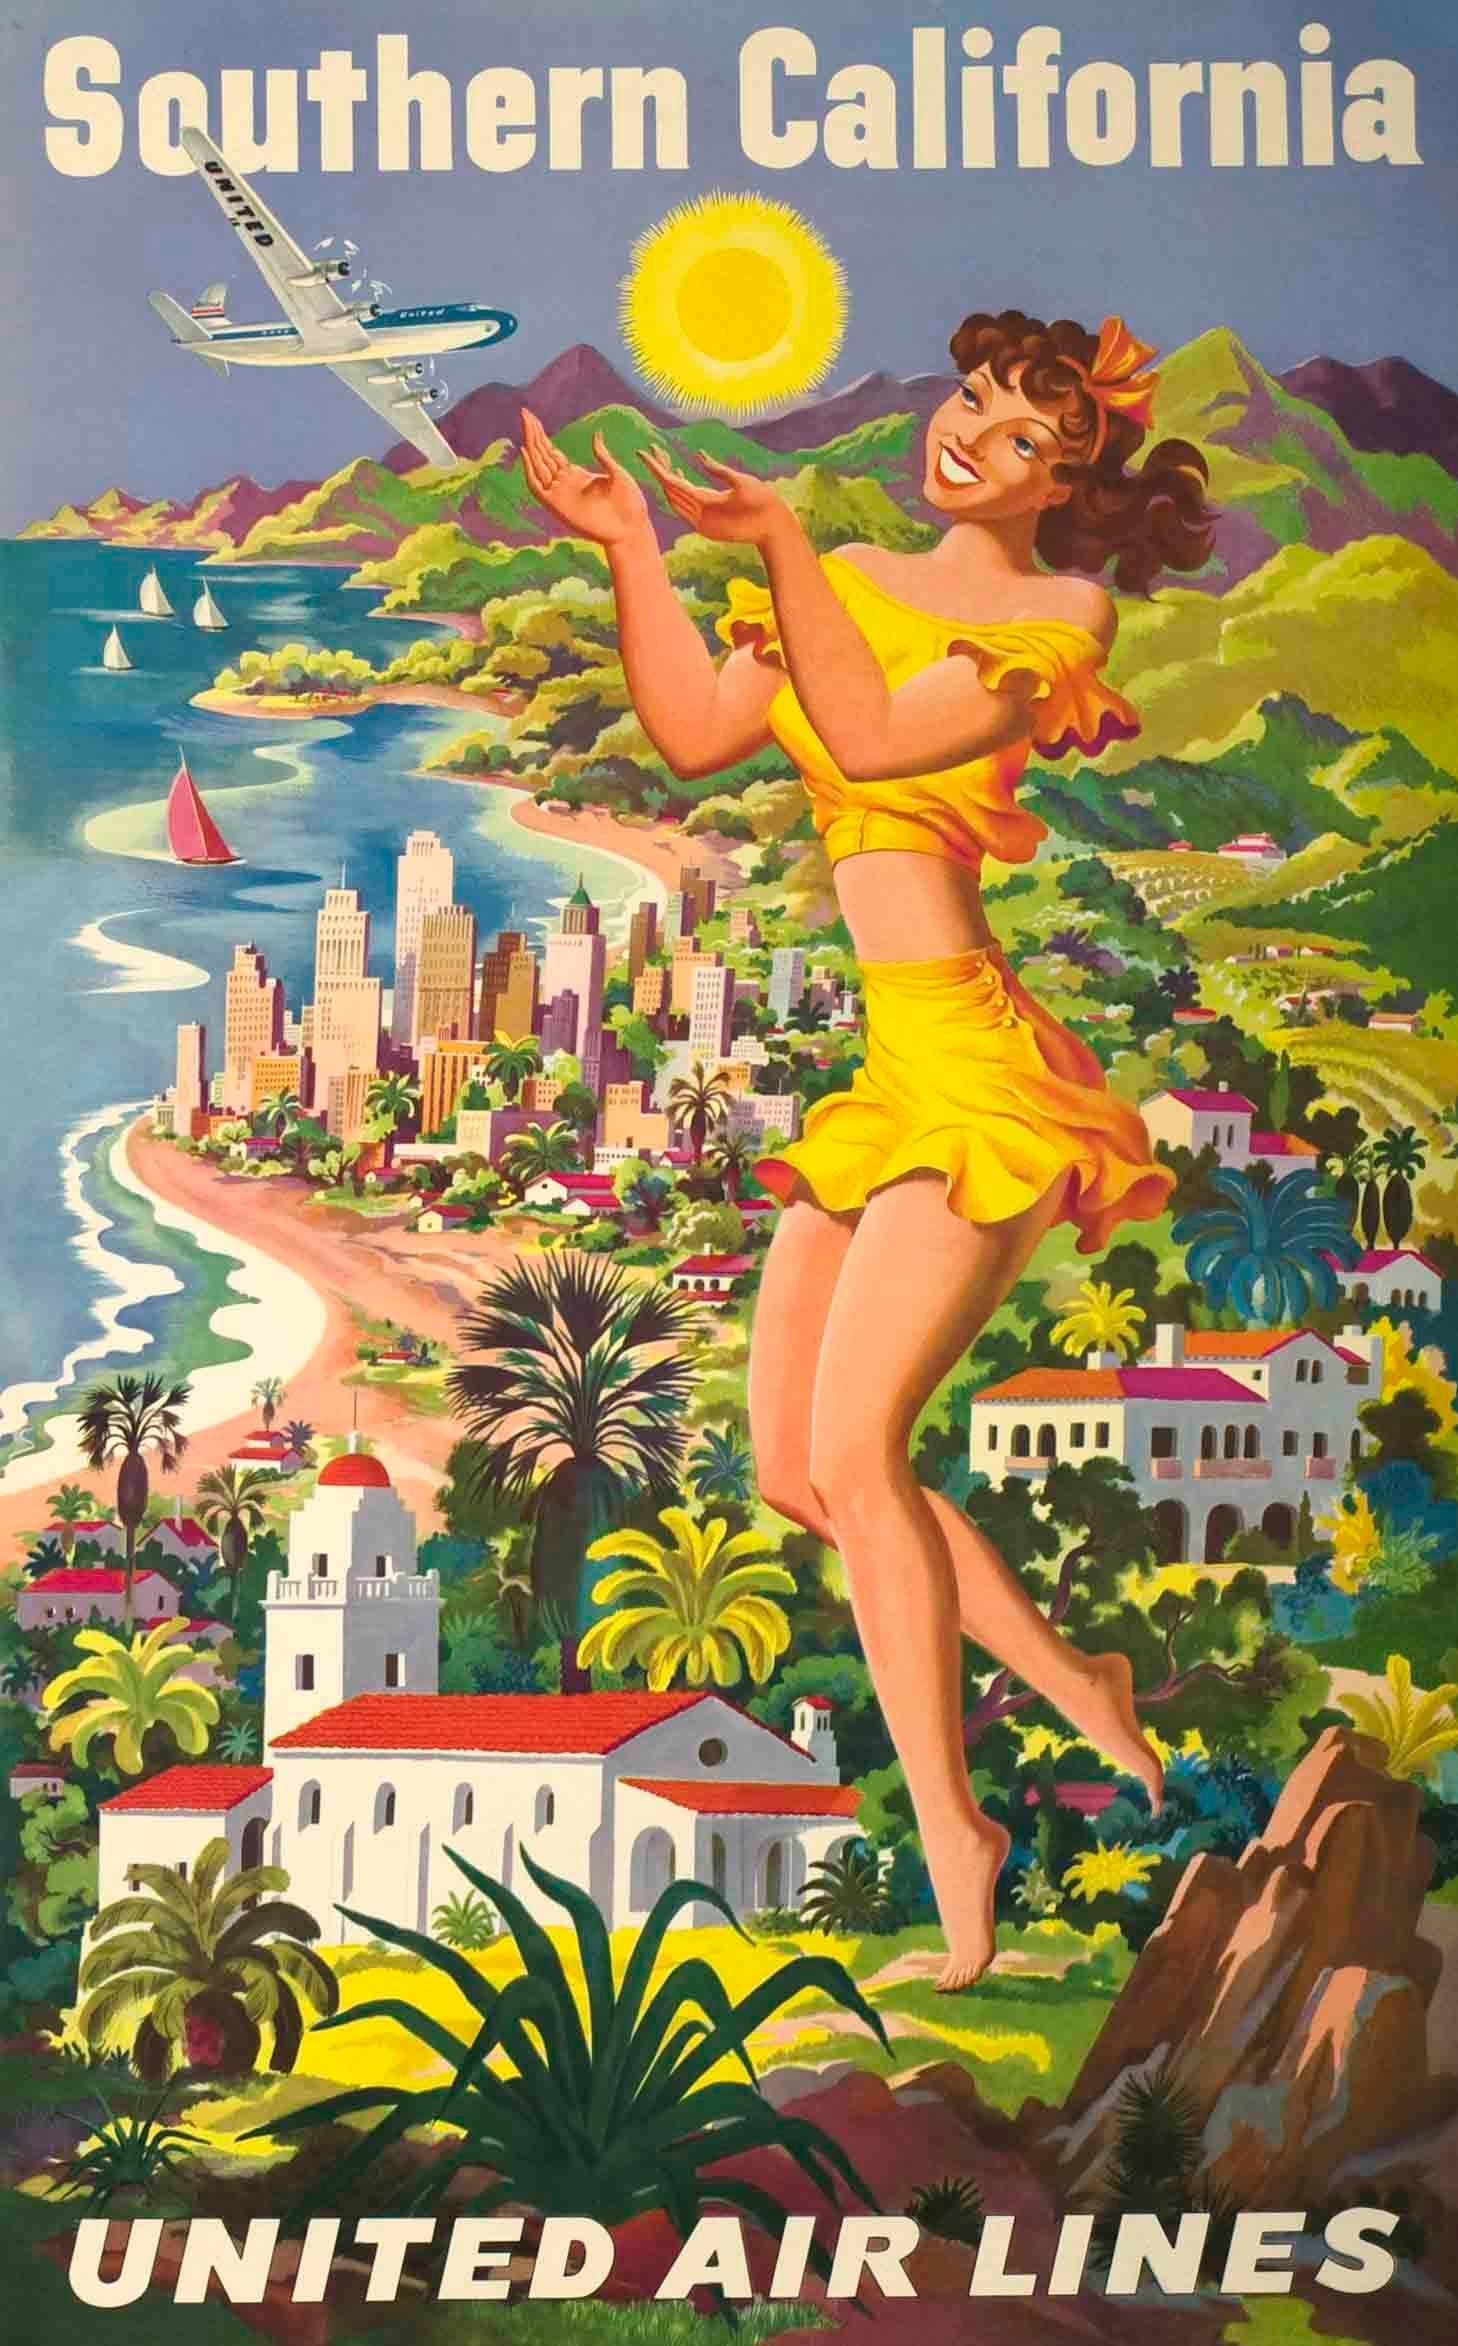 "Southern California - United Air Lines" Original Vintage Airline poster - Print by Joseph Feher